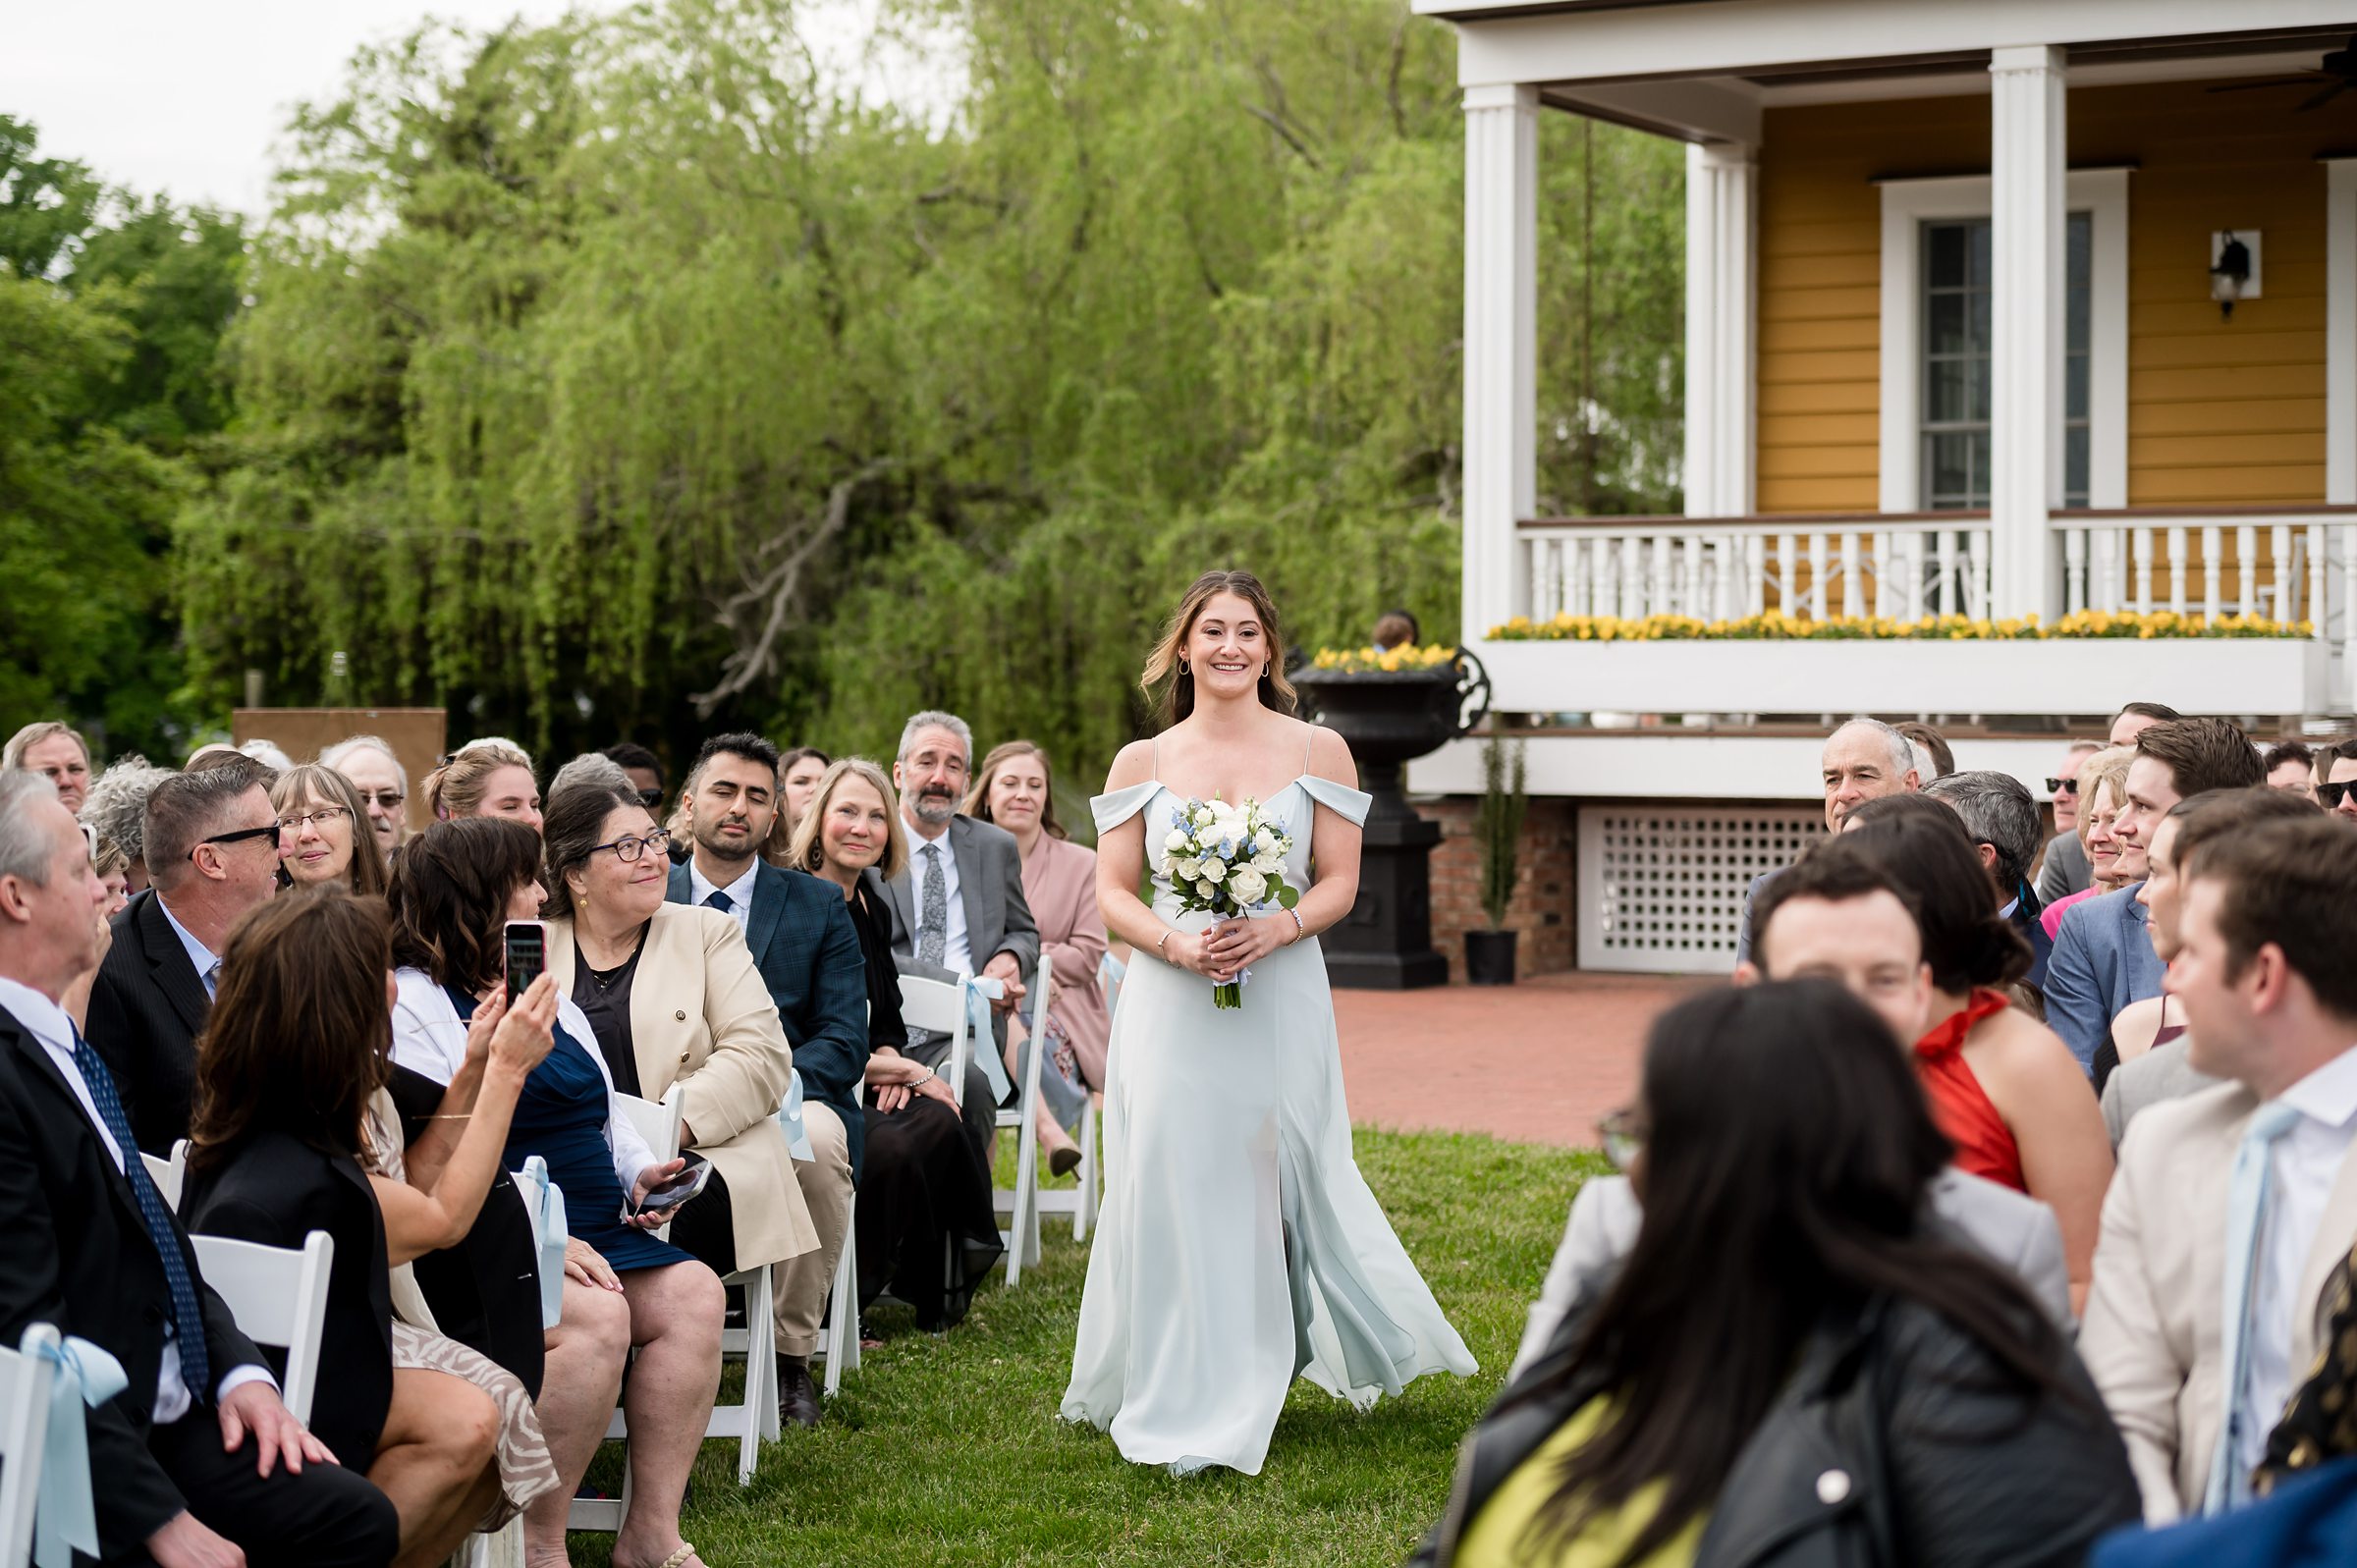 A woman in a light blue dress walks down an outdoor aisle holding a bouquet of flowers, with seated guests on either side, during what appears to be a wedding ceremony.